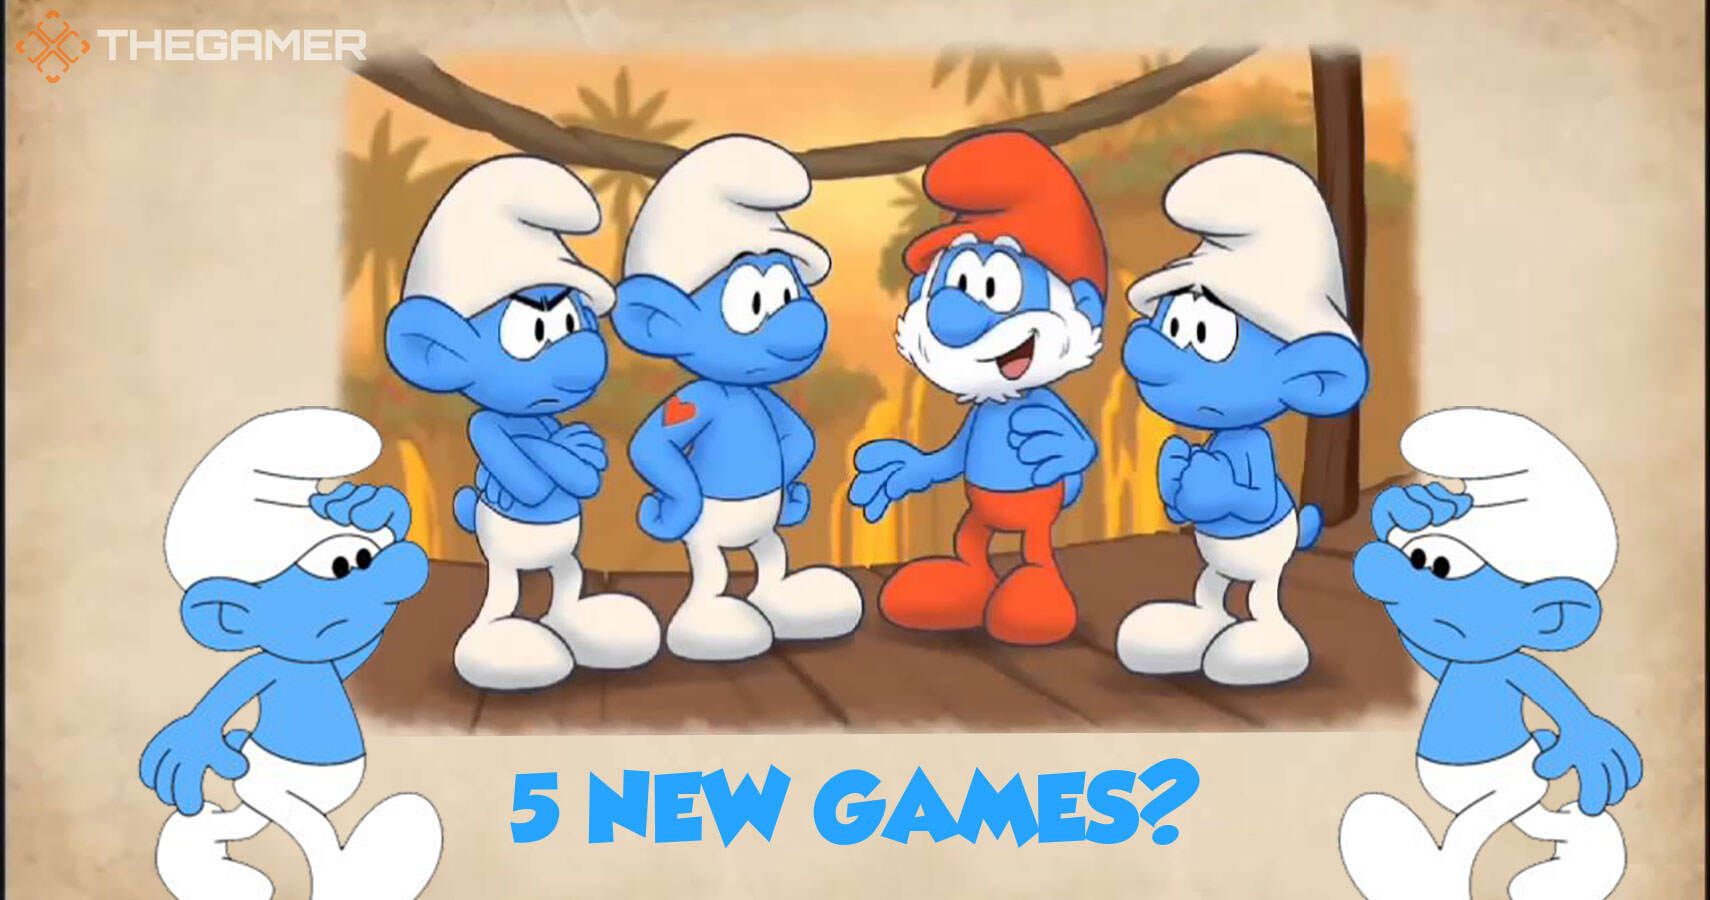 The Smurfs--Yes, The Little Blue Things--Are Getting 5 New Games